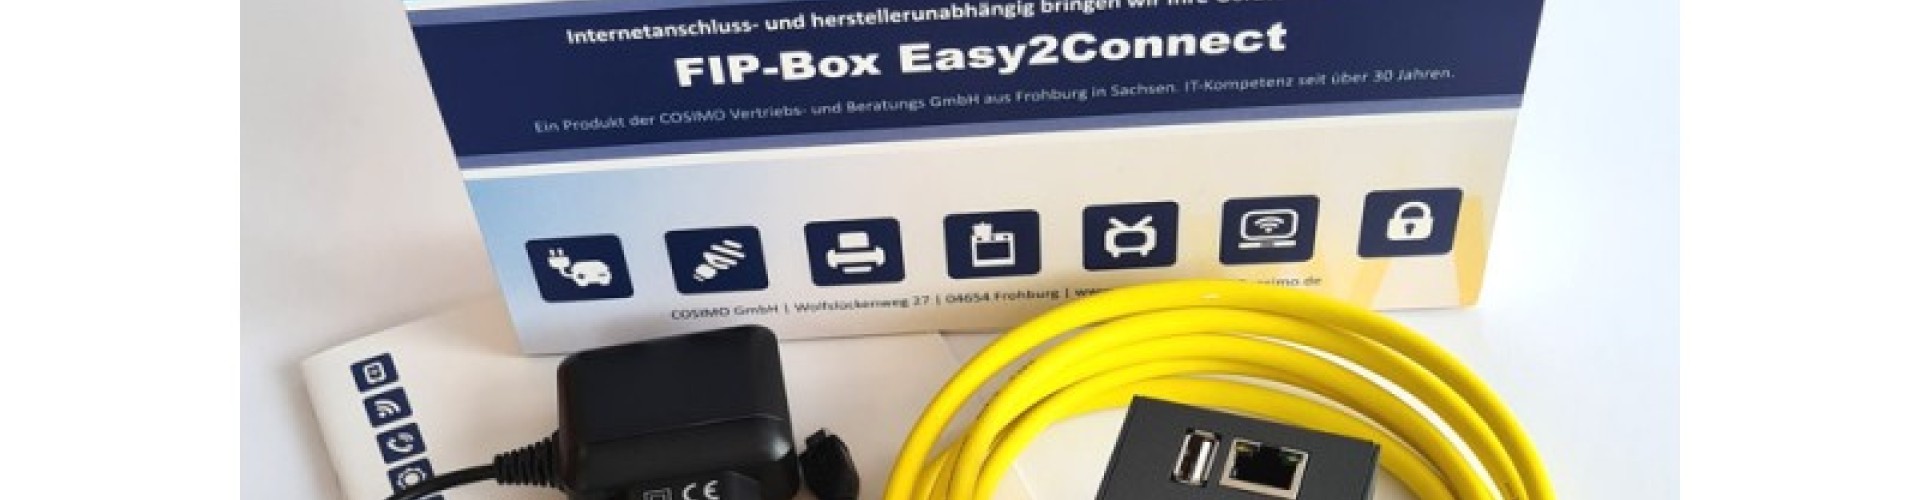 fip-box-easy2connect-compact